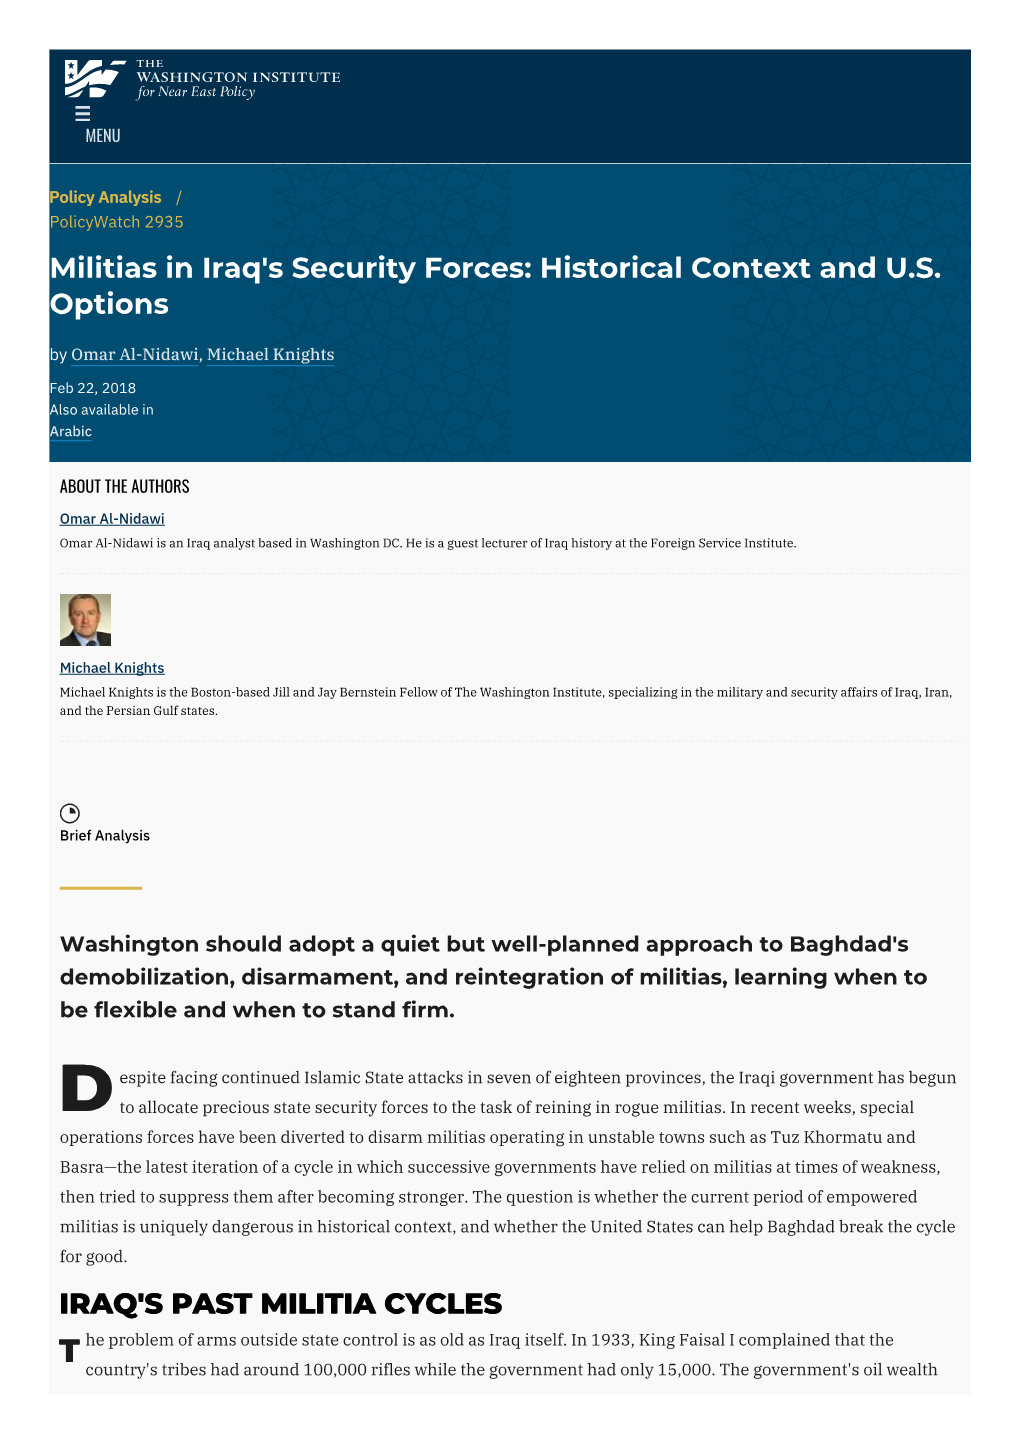 Militias in Iraq's Security Forces: Historical Context and U.S